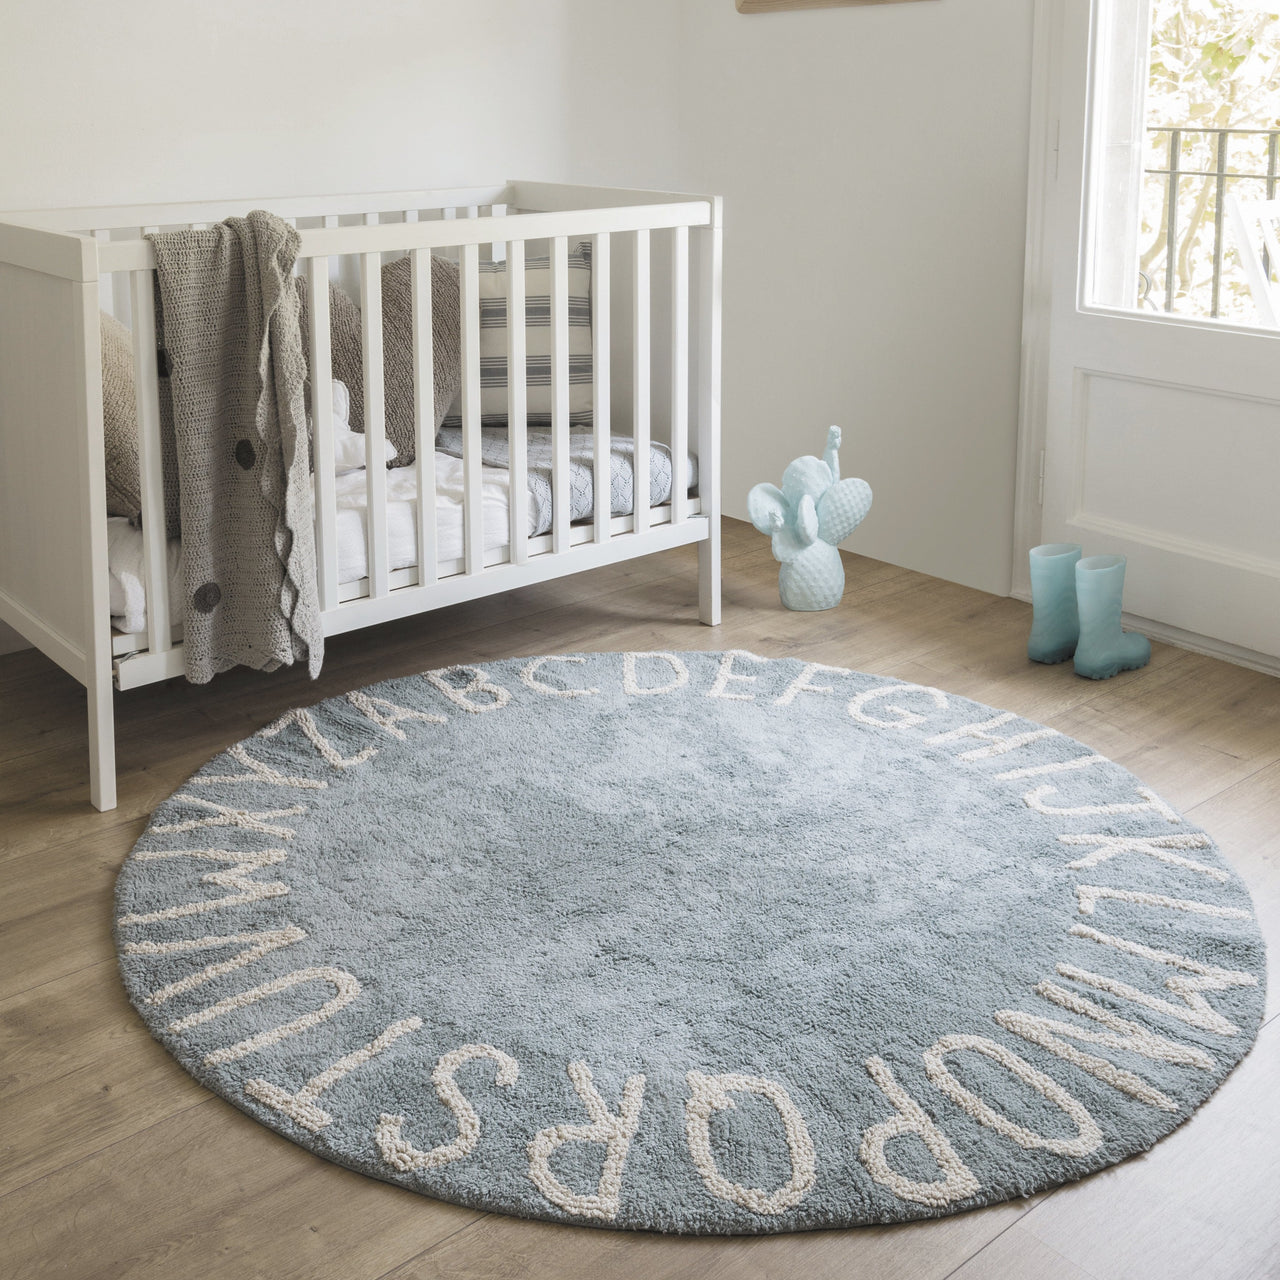 From A to Z… With the Round ABC collection from Lorena Canals, you can decorate your children’s room with a modern and elegant style! 100% cotton, round and machine-washable (conventional washing machine with 6 kg capacity), its design and neutral colour is a hit among boys and girls. 